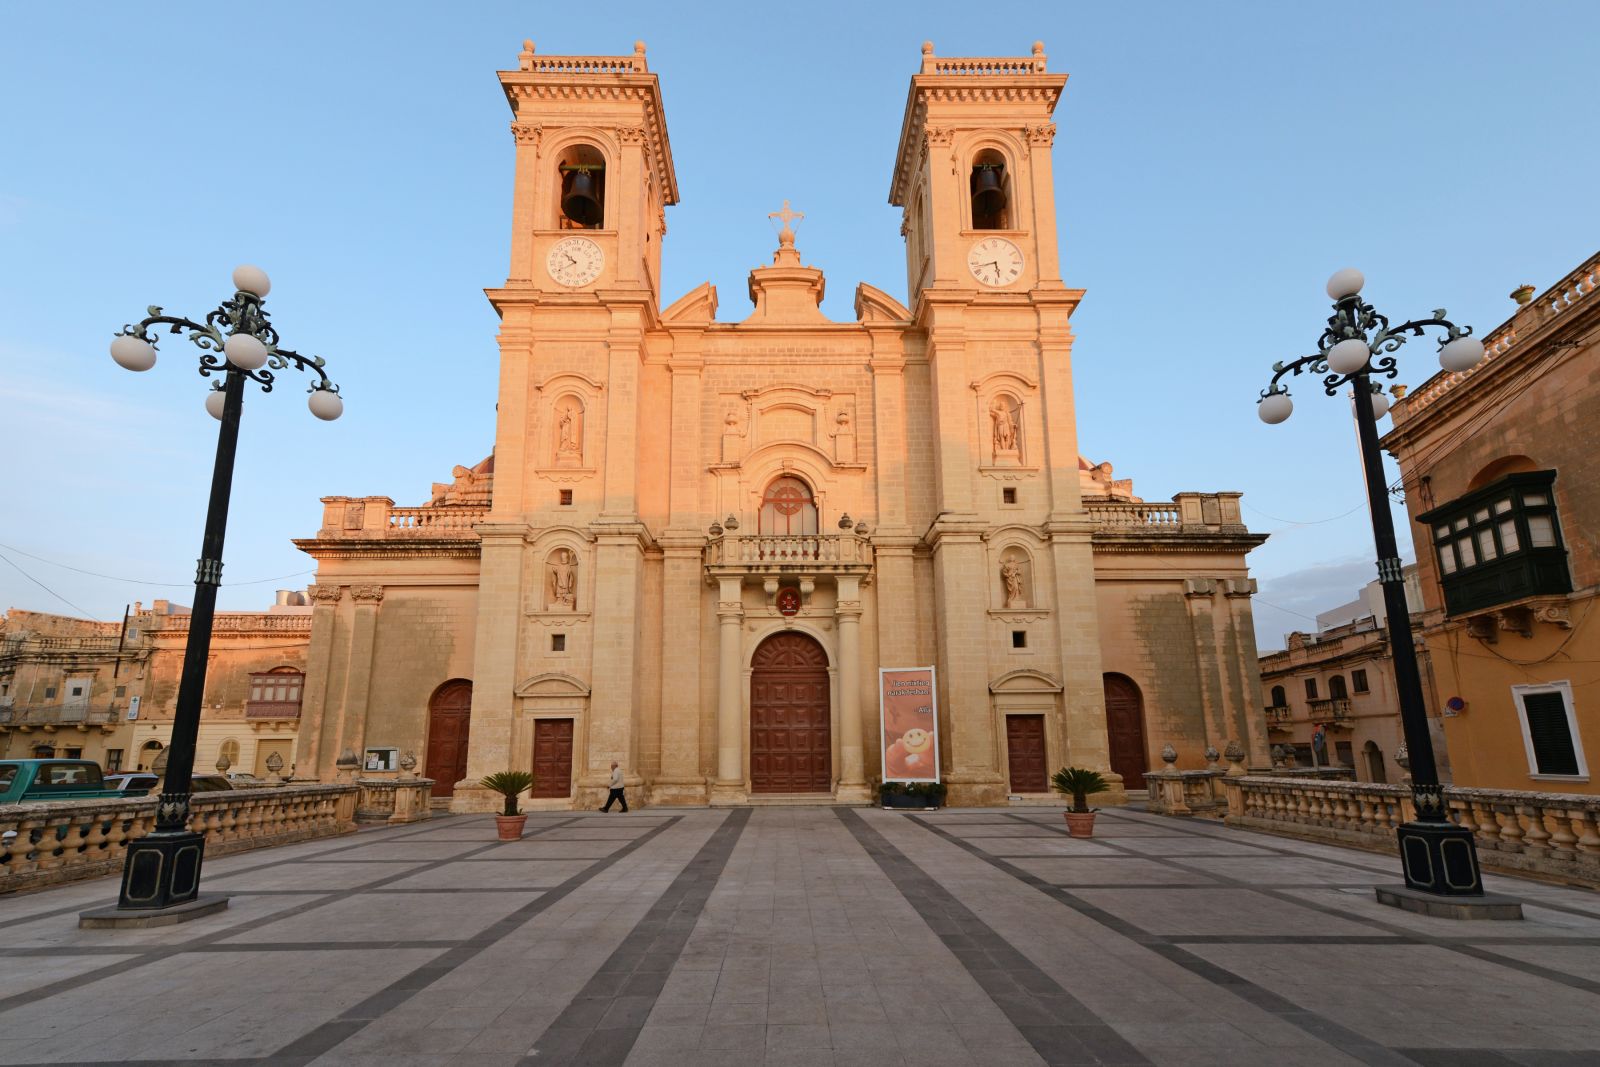 If looking for properties for sale in Zebbug be sure to admire the traditional Maltese buildings surrounding the town’s parish church.